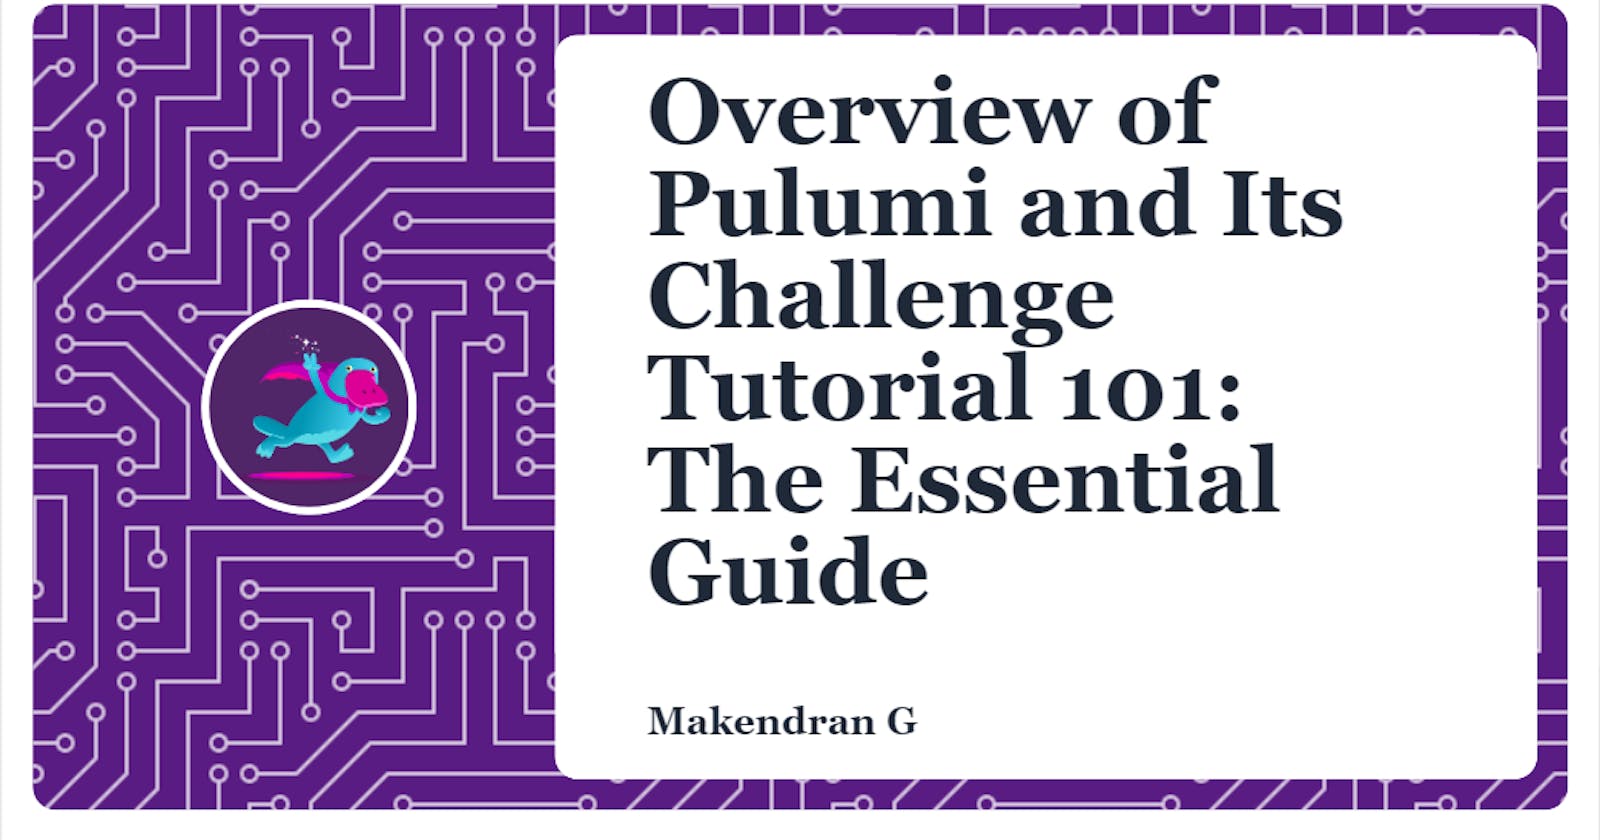 Overview of Pulumi and Its Challenge Tutorial 101: The Essential Guide